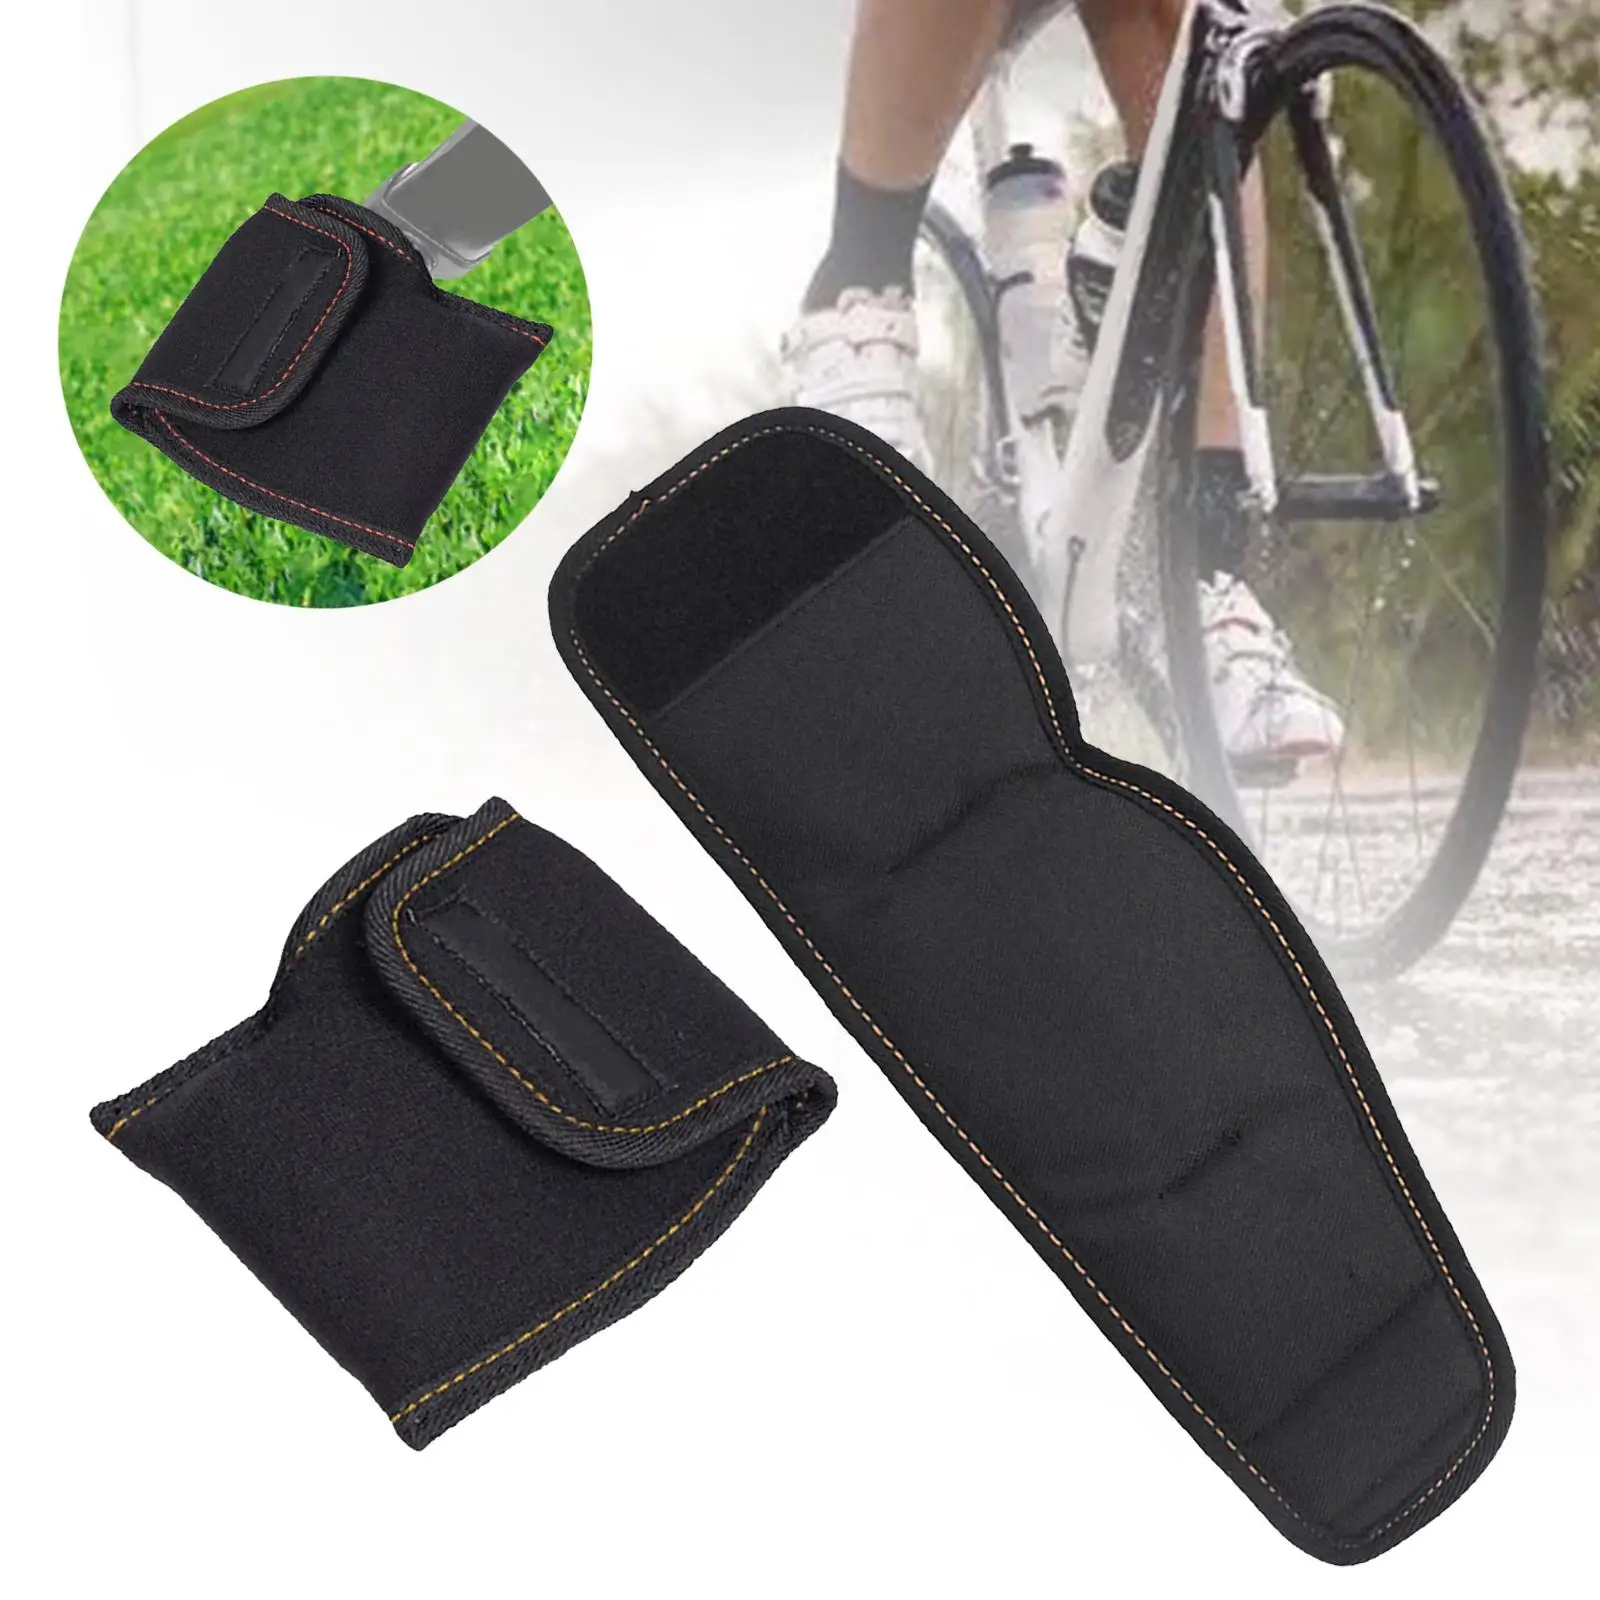 1 Pair Bike Pedal Protective Cover Oxford Cloth Foot Platform Protector Accessories Replacement for Cycling Mountain Road Bike